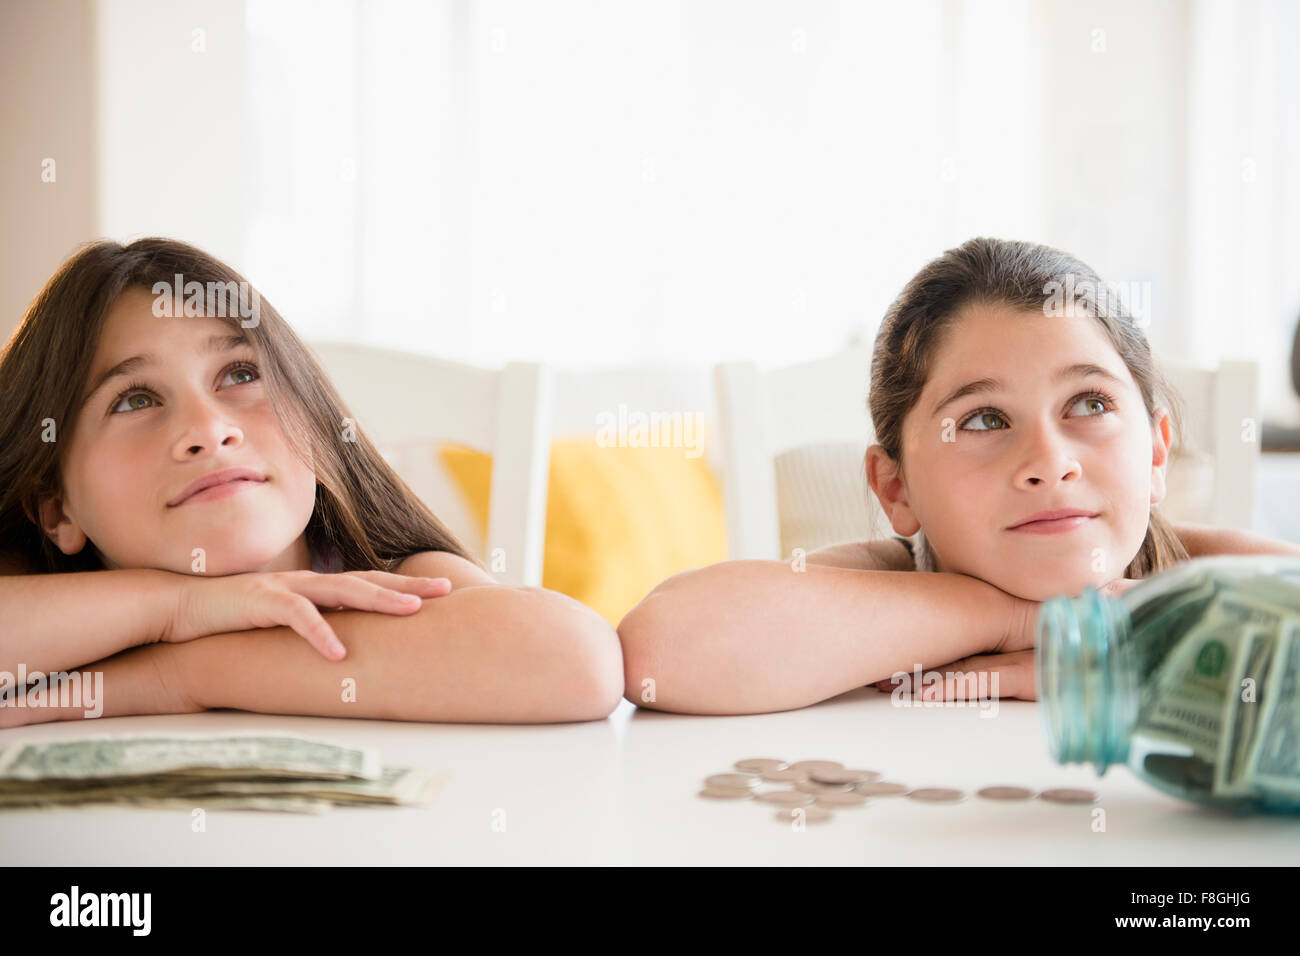 Caucasian twin sisters daydreaming Stock Photo